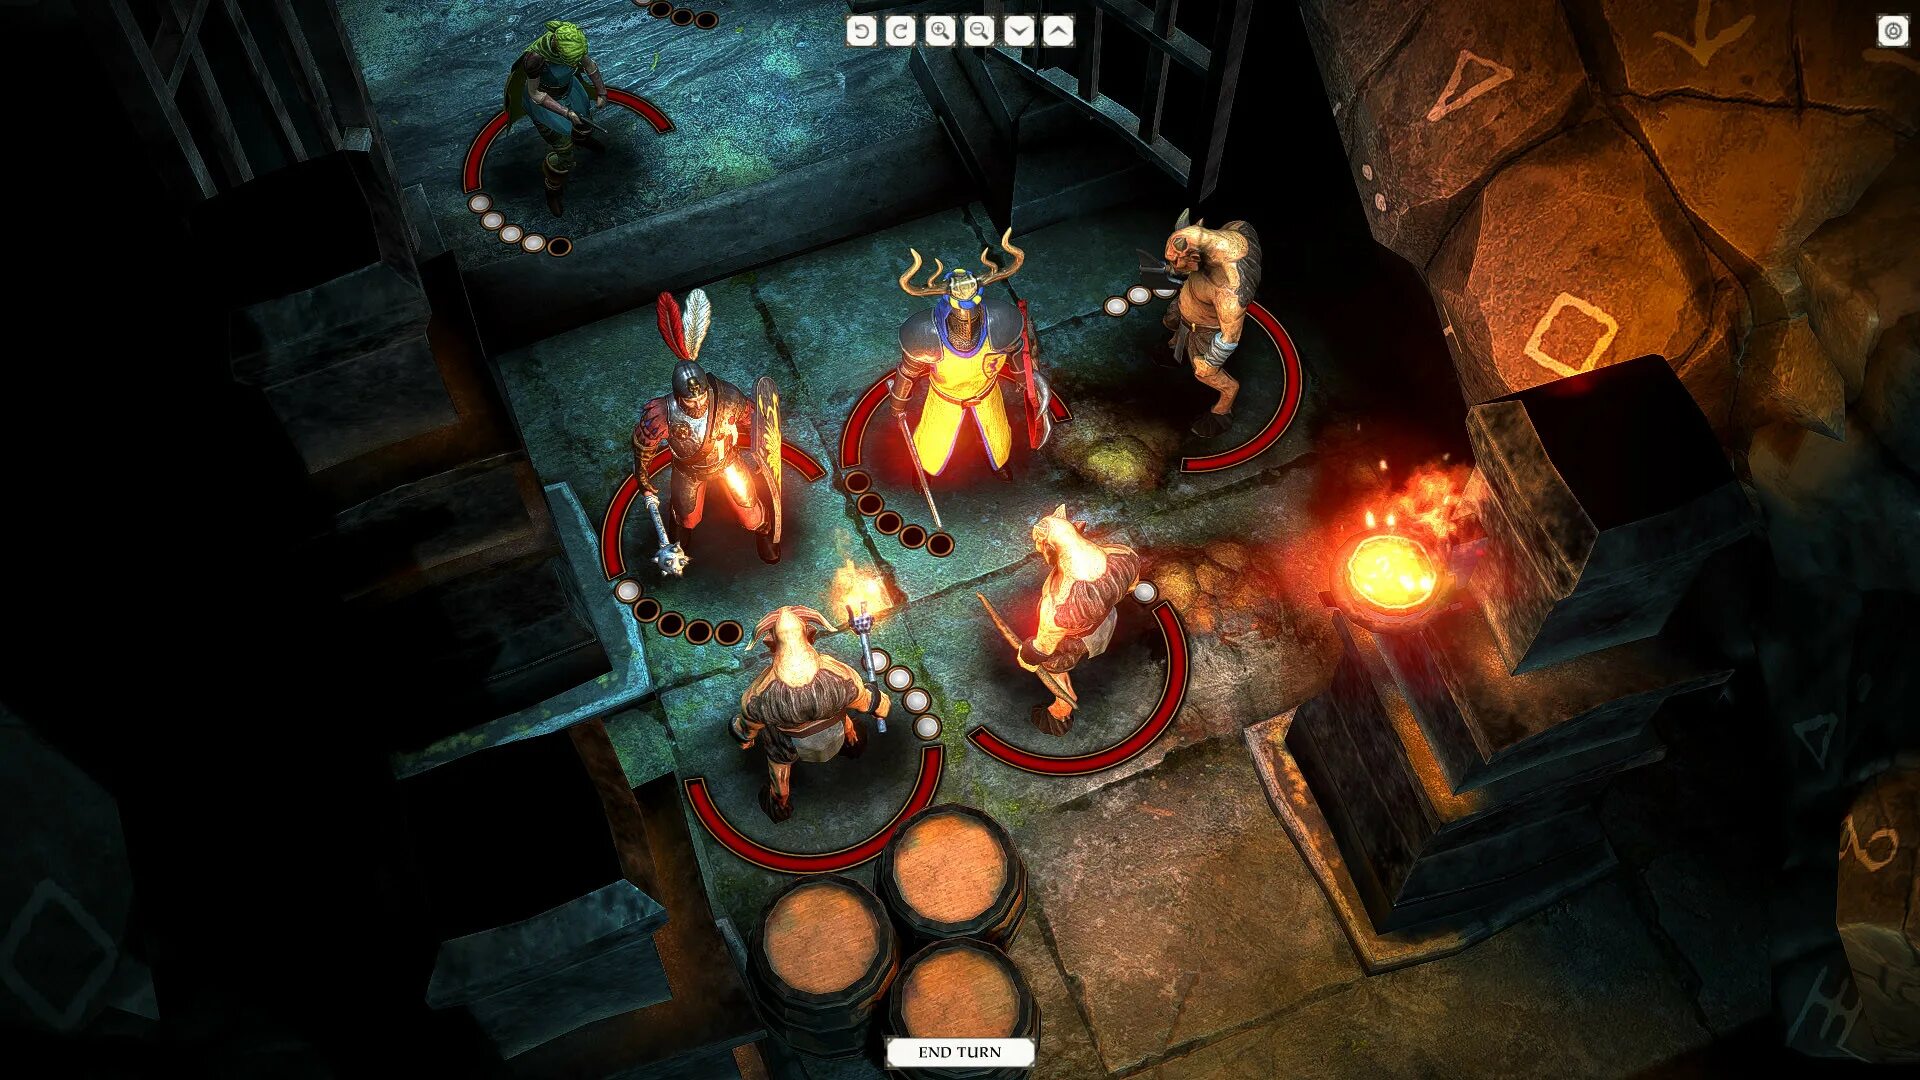 Quest 2 игры apk. Warhammer Quest 2: the end times. Warhammer Quest 2: the end times ps4. Игра вархаммер квест. Warhammer Quest 2 the end times by xatab.